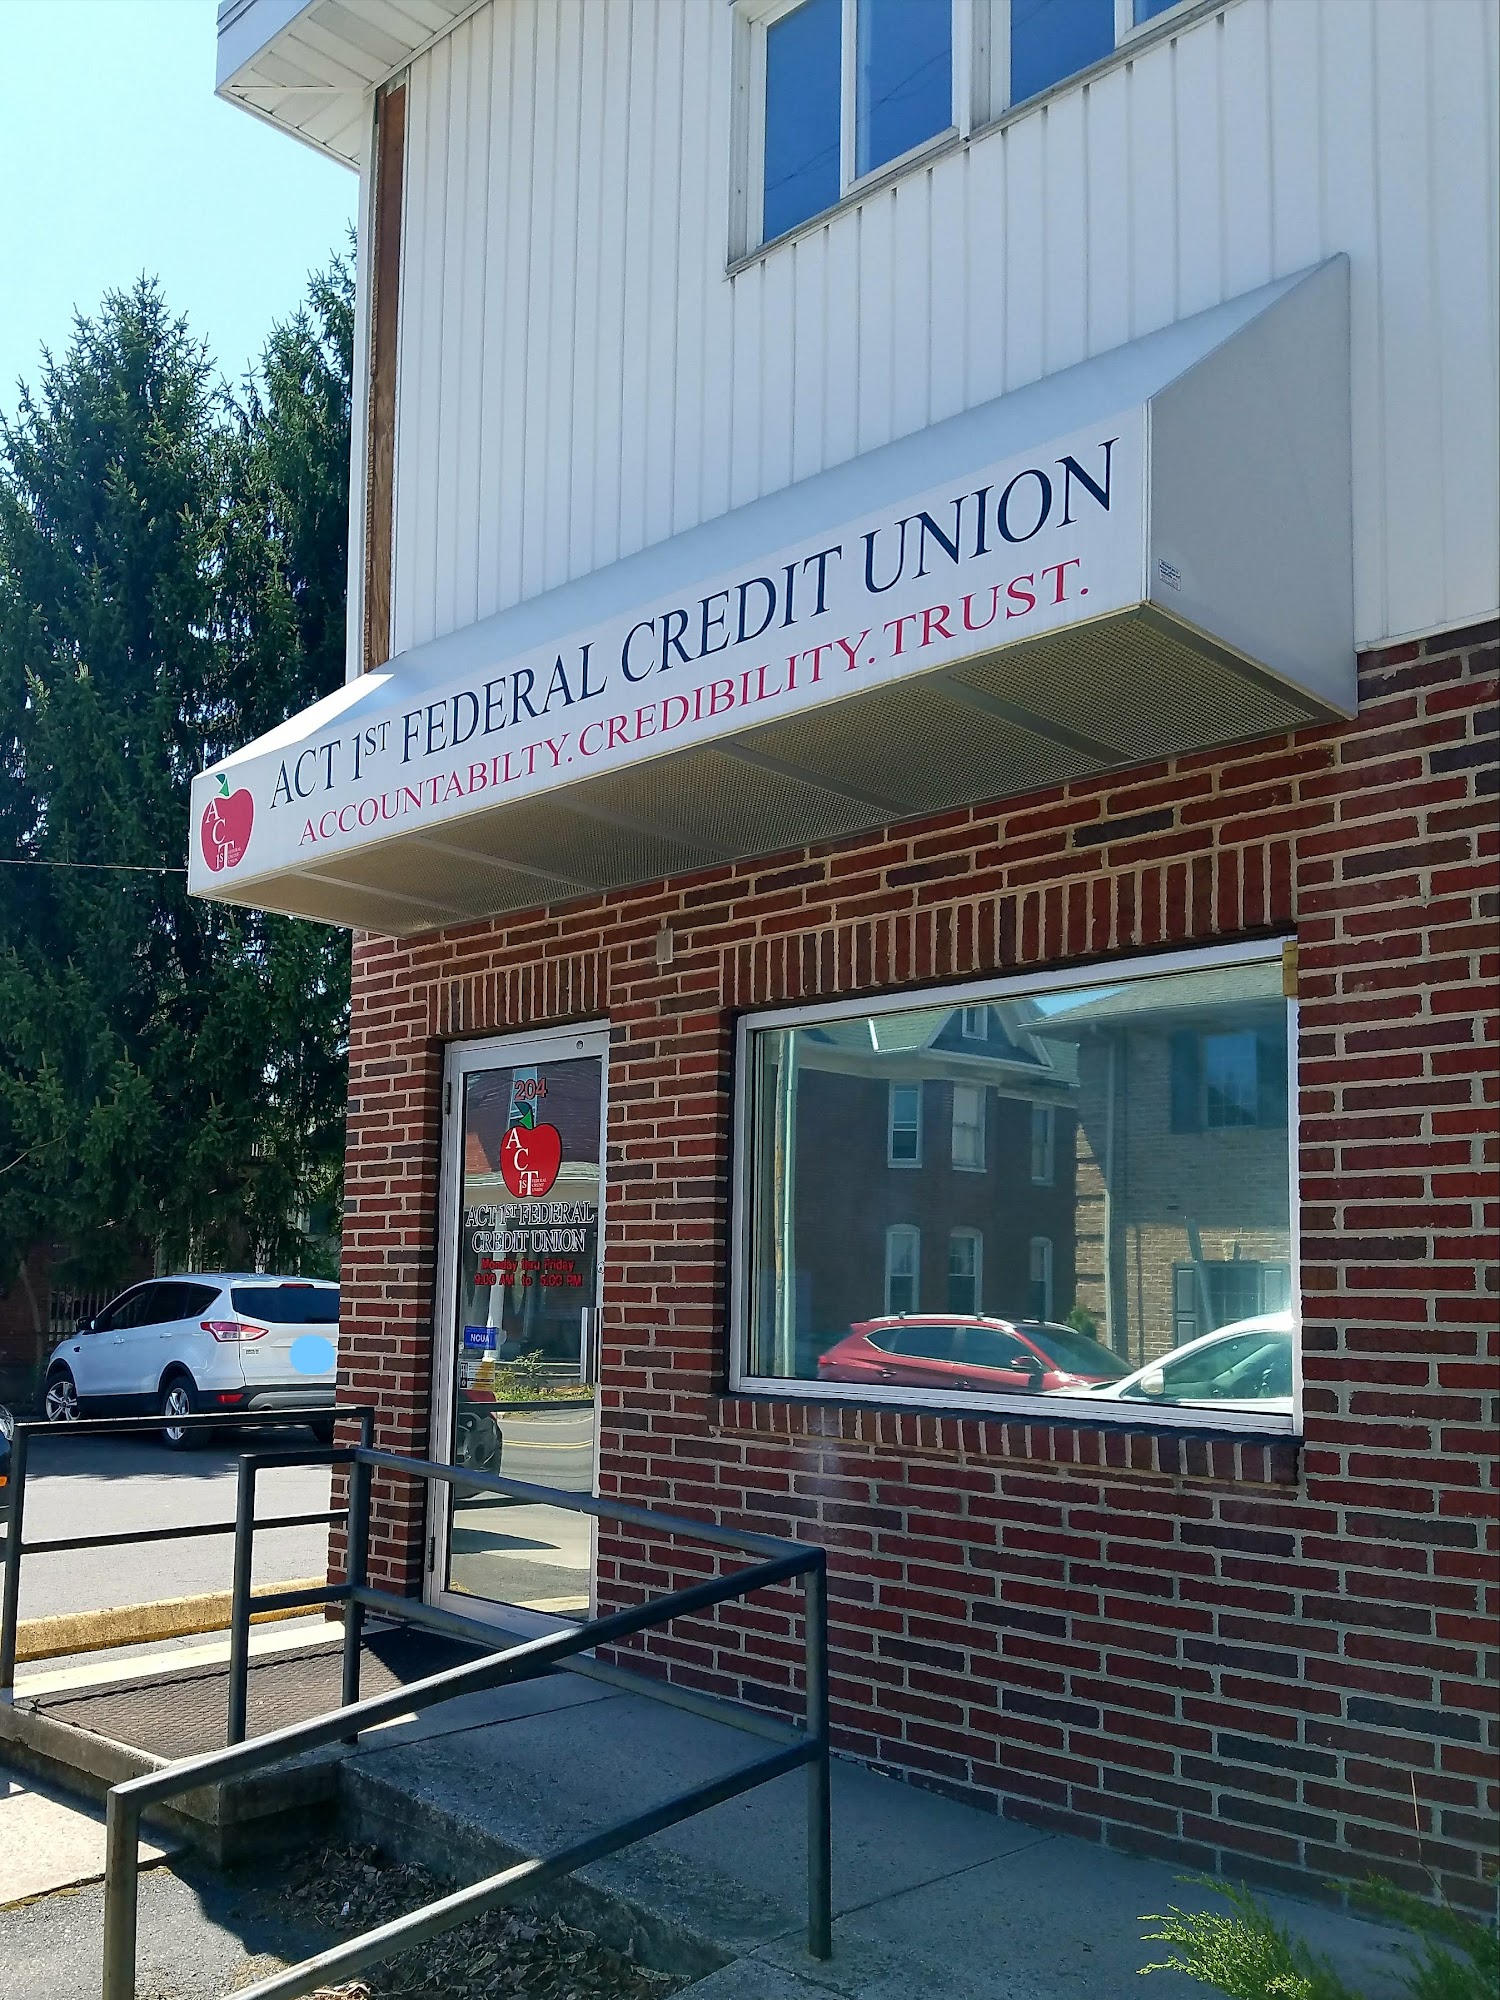 ACT 1st Federal Credit Union